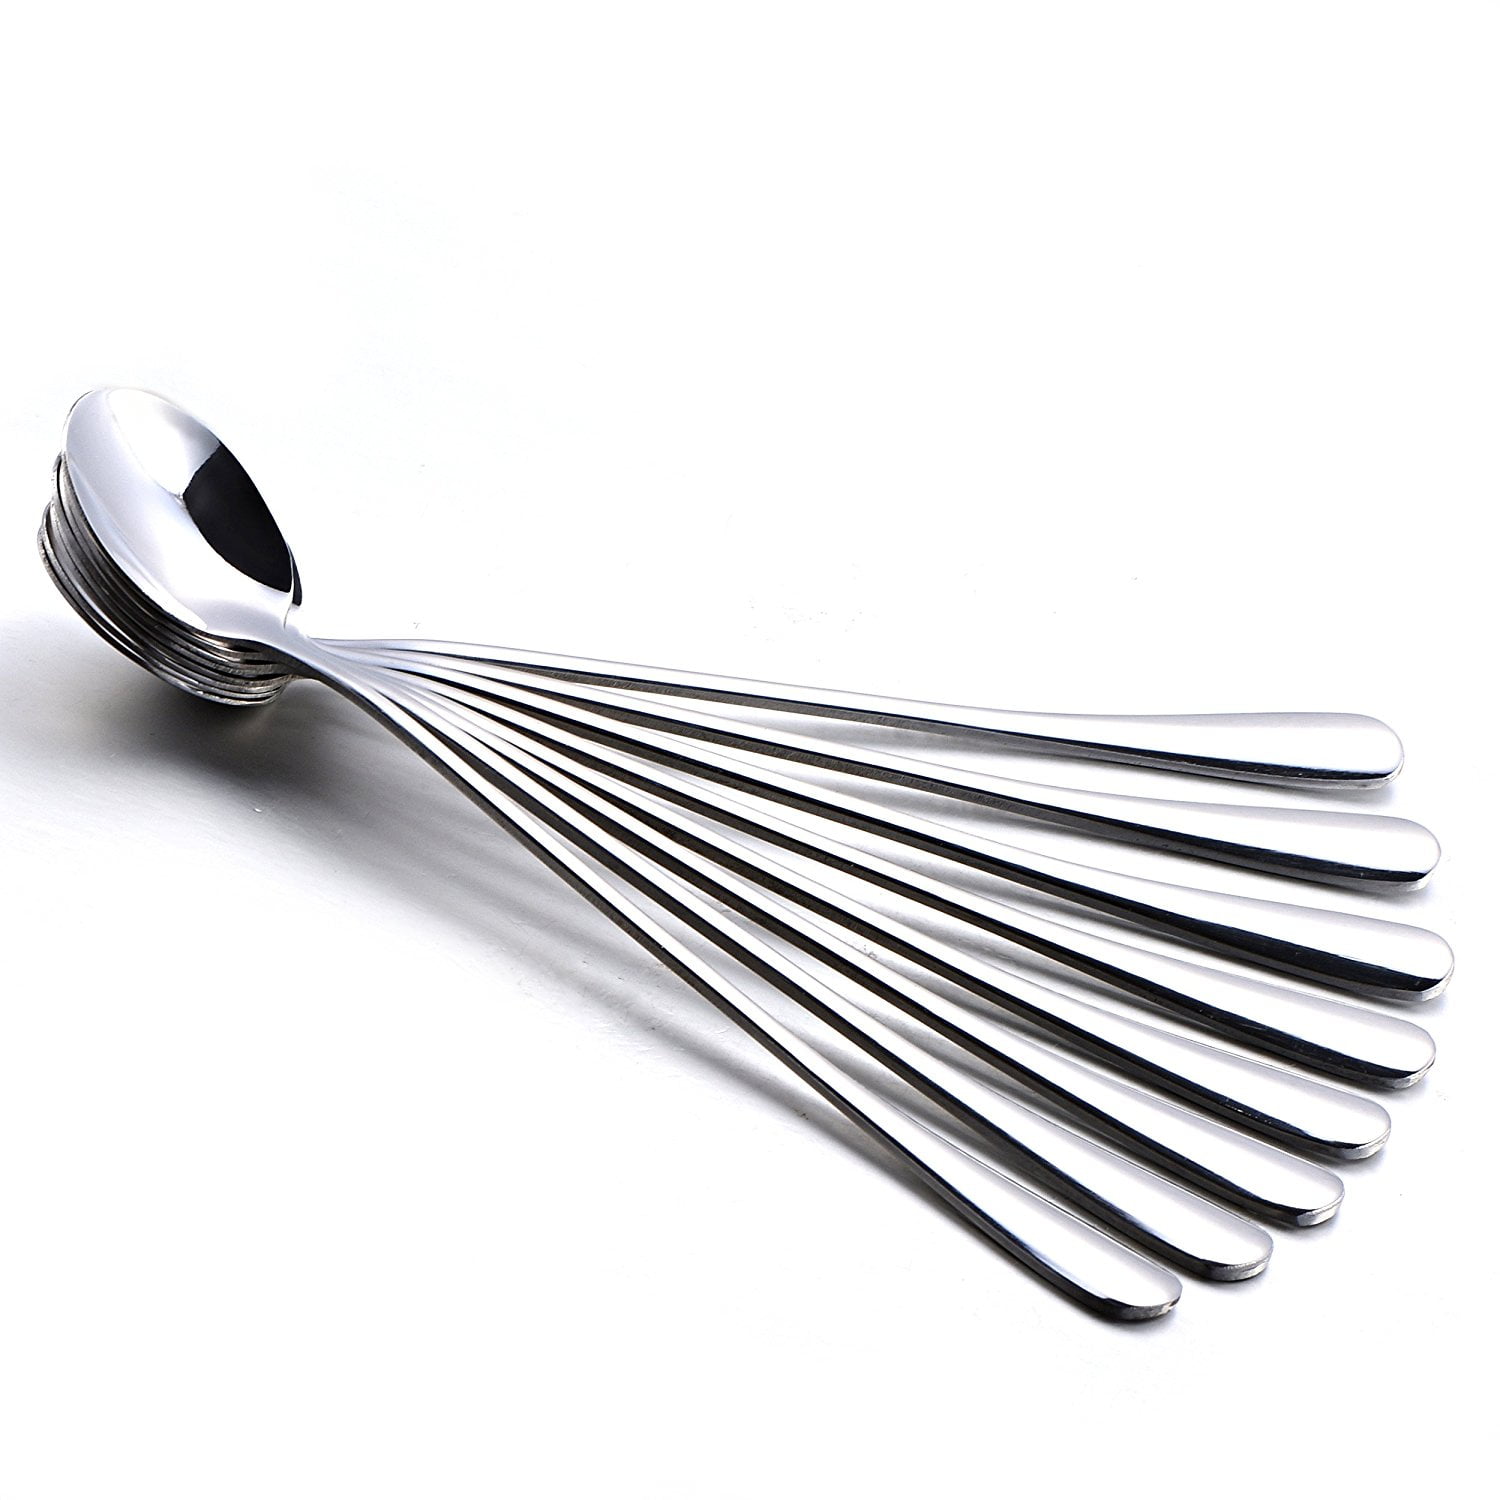 Stainless Steel Small Spoon Spoons Flatware For Ice Cream Coffee Tea Tableware 